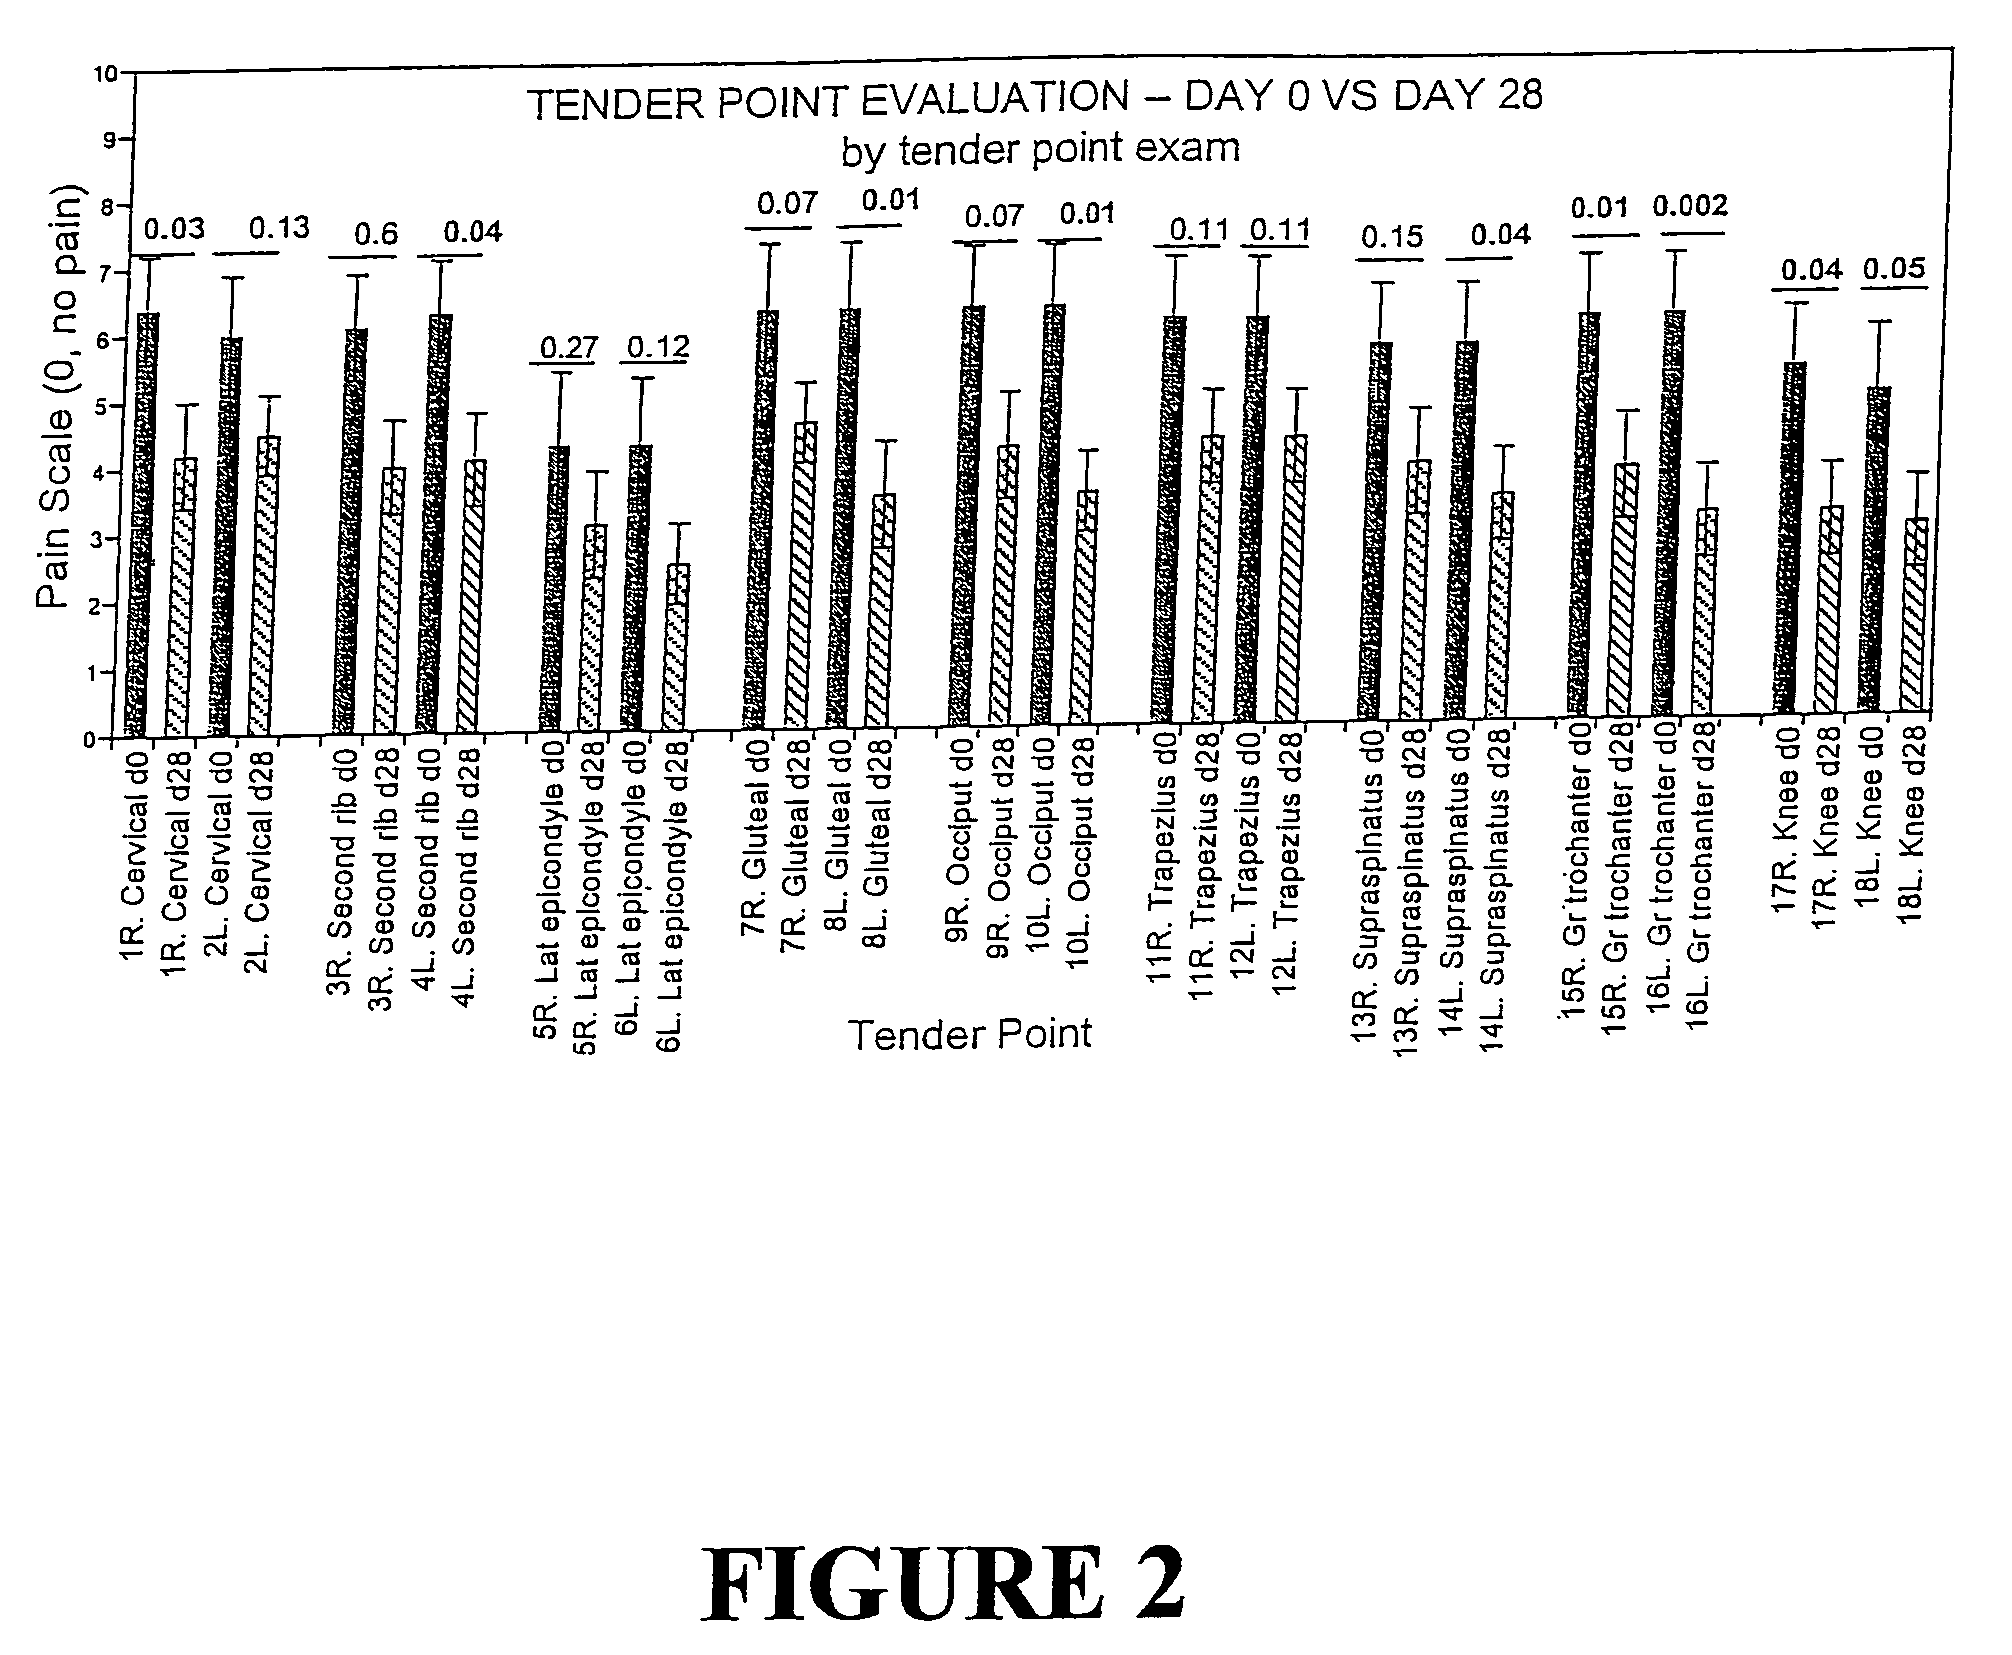 Transdermal compositions and methods for treatment of fibromyalgia and chronic fatigue syndrome